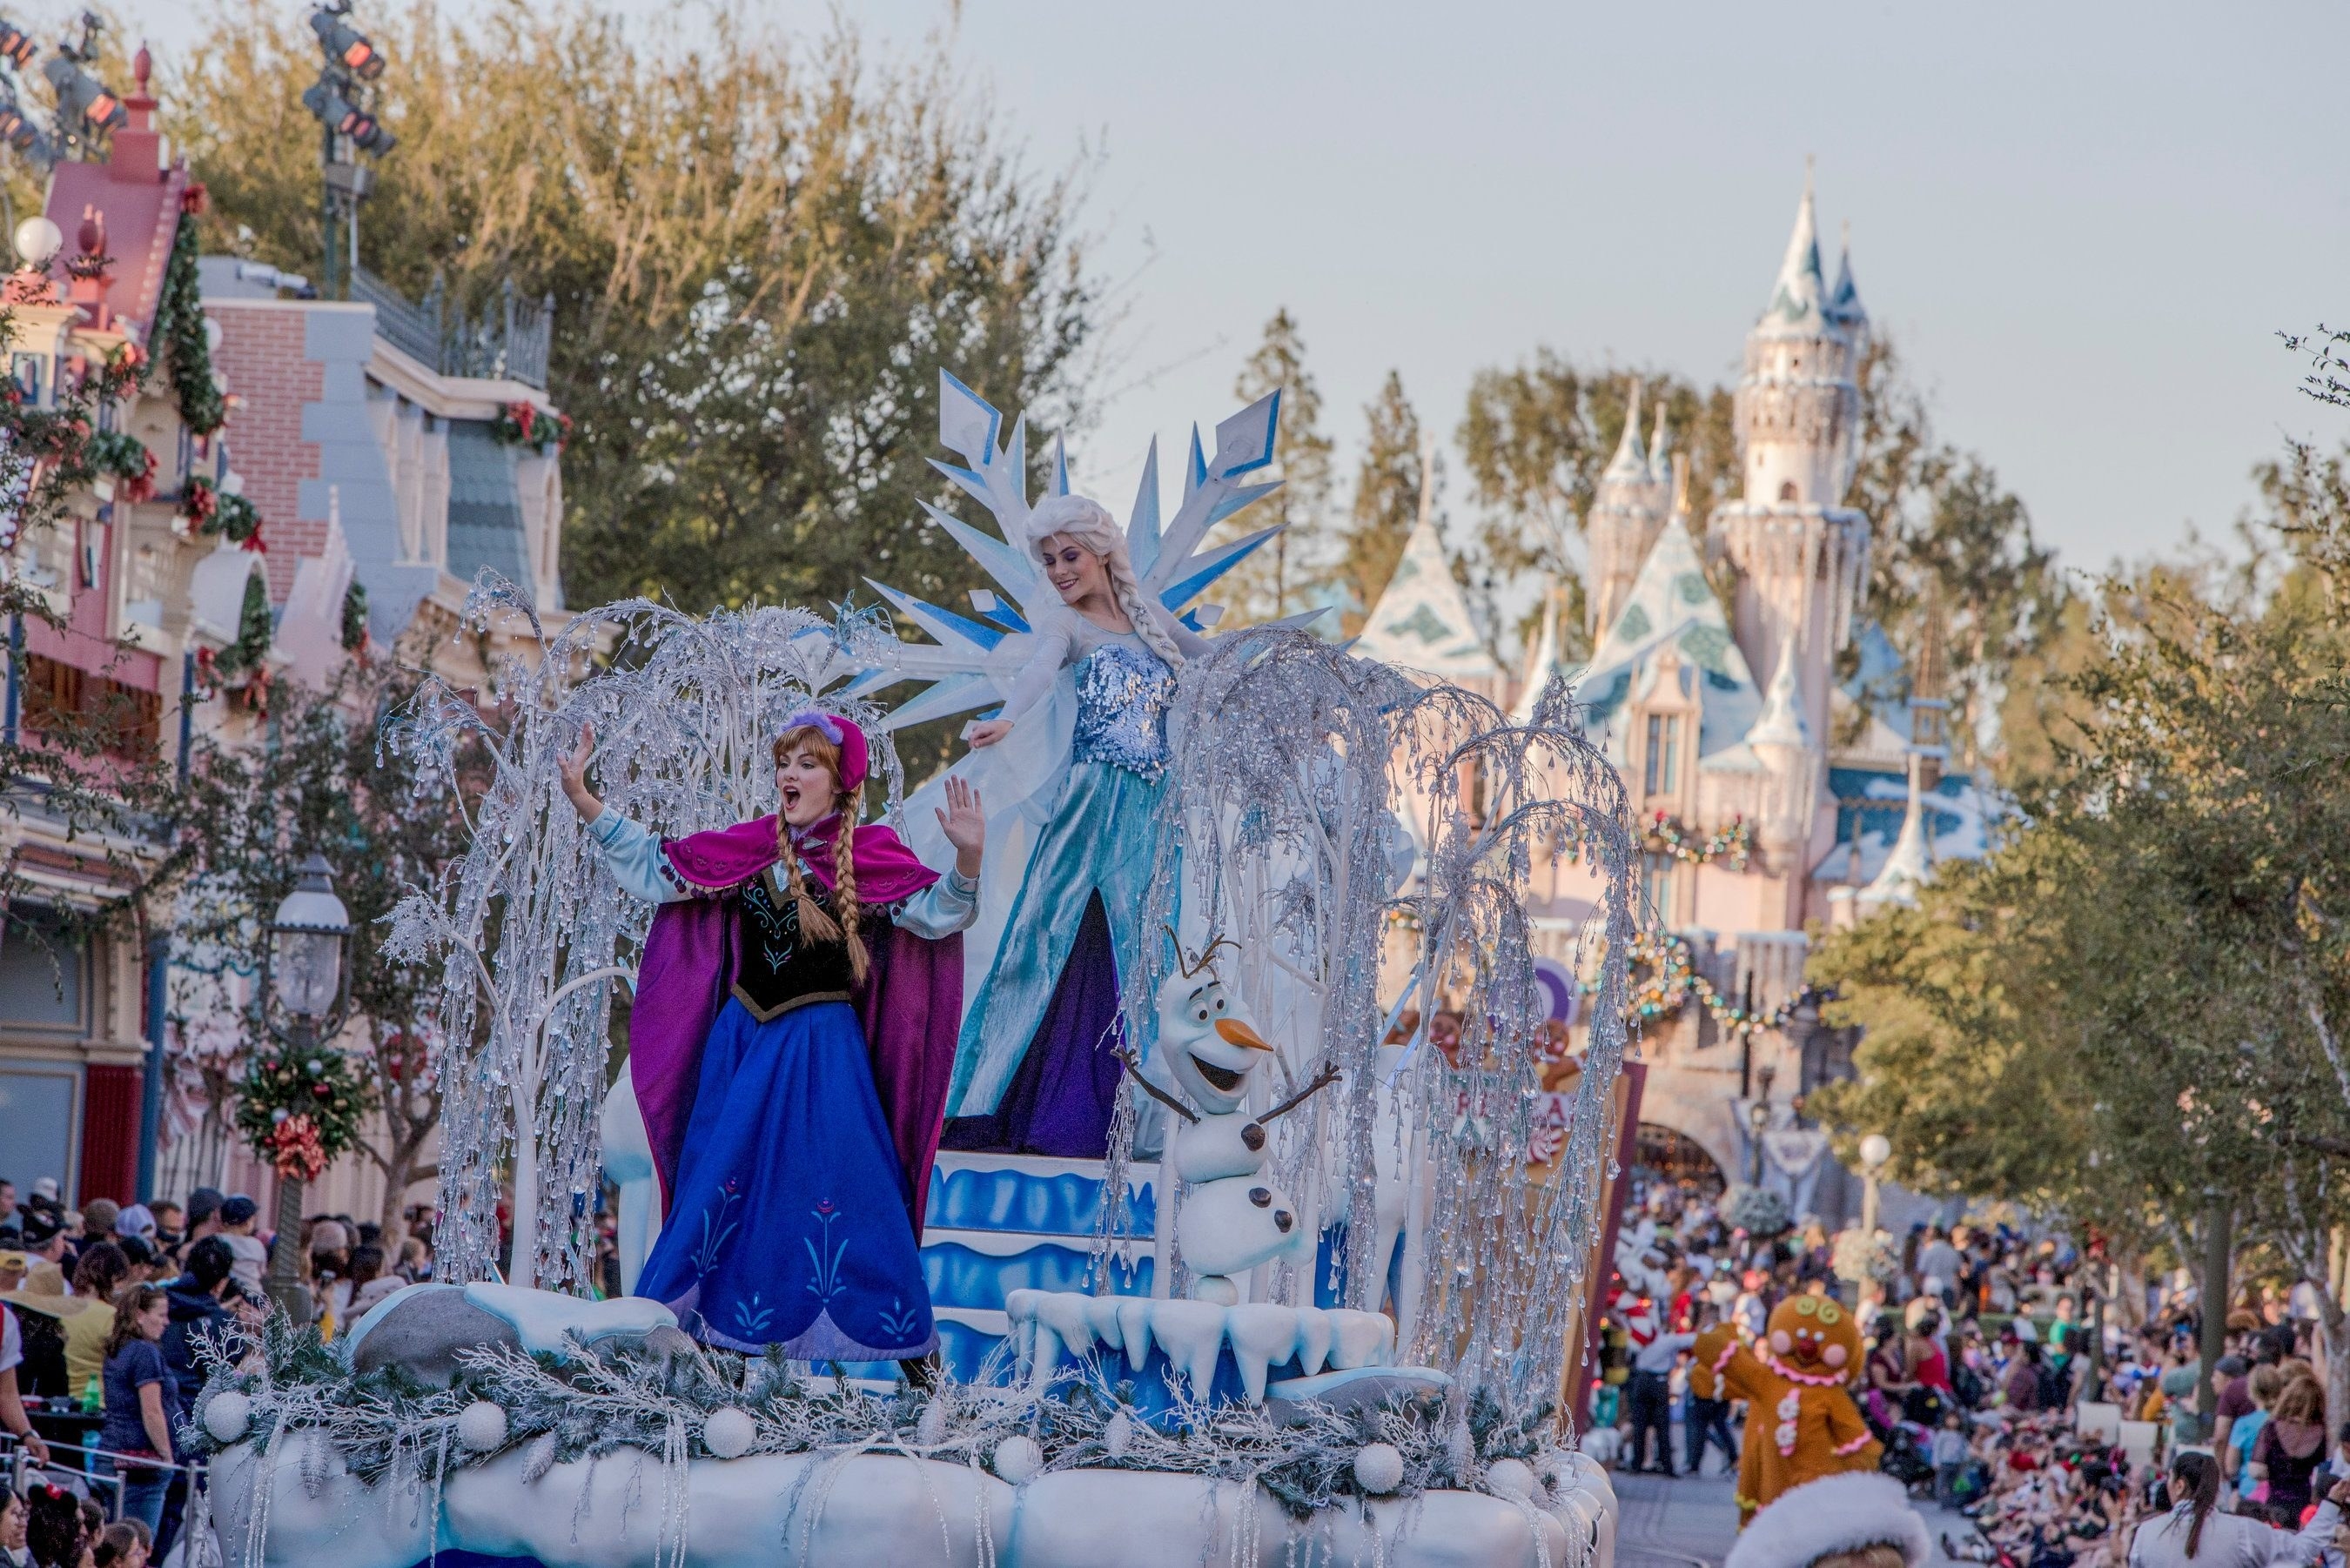 A Frozen float in the holiday parade